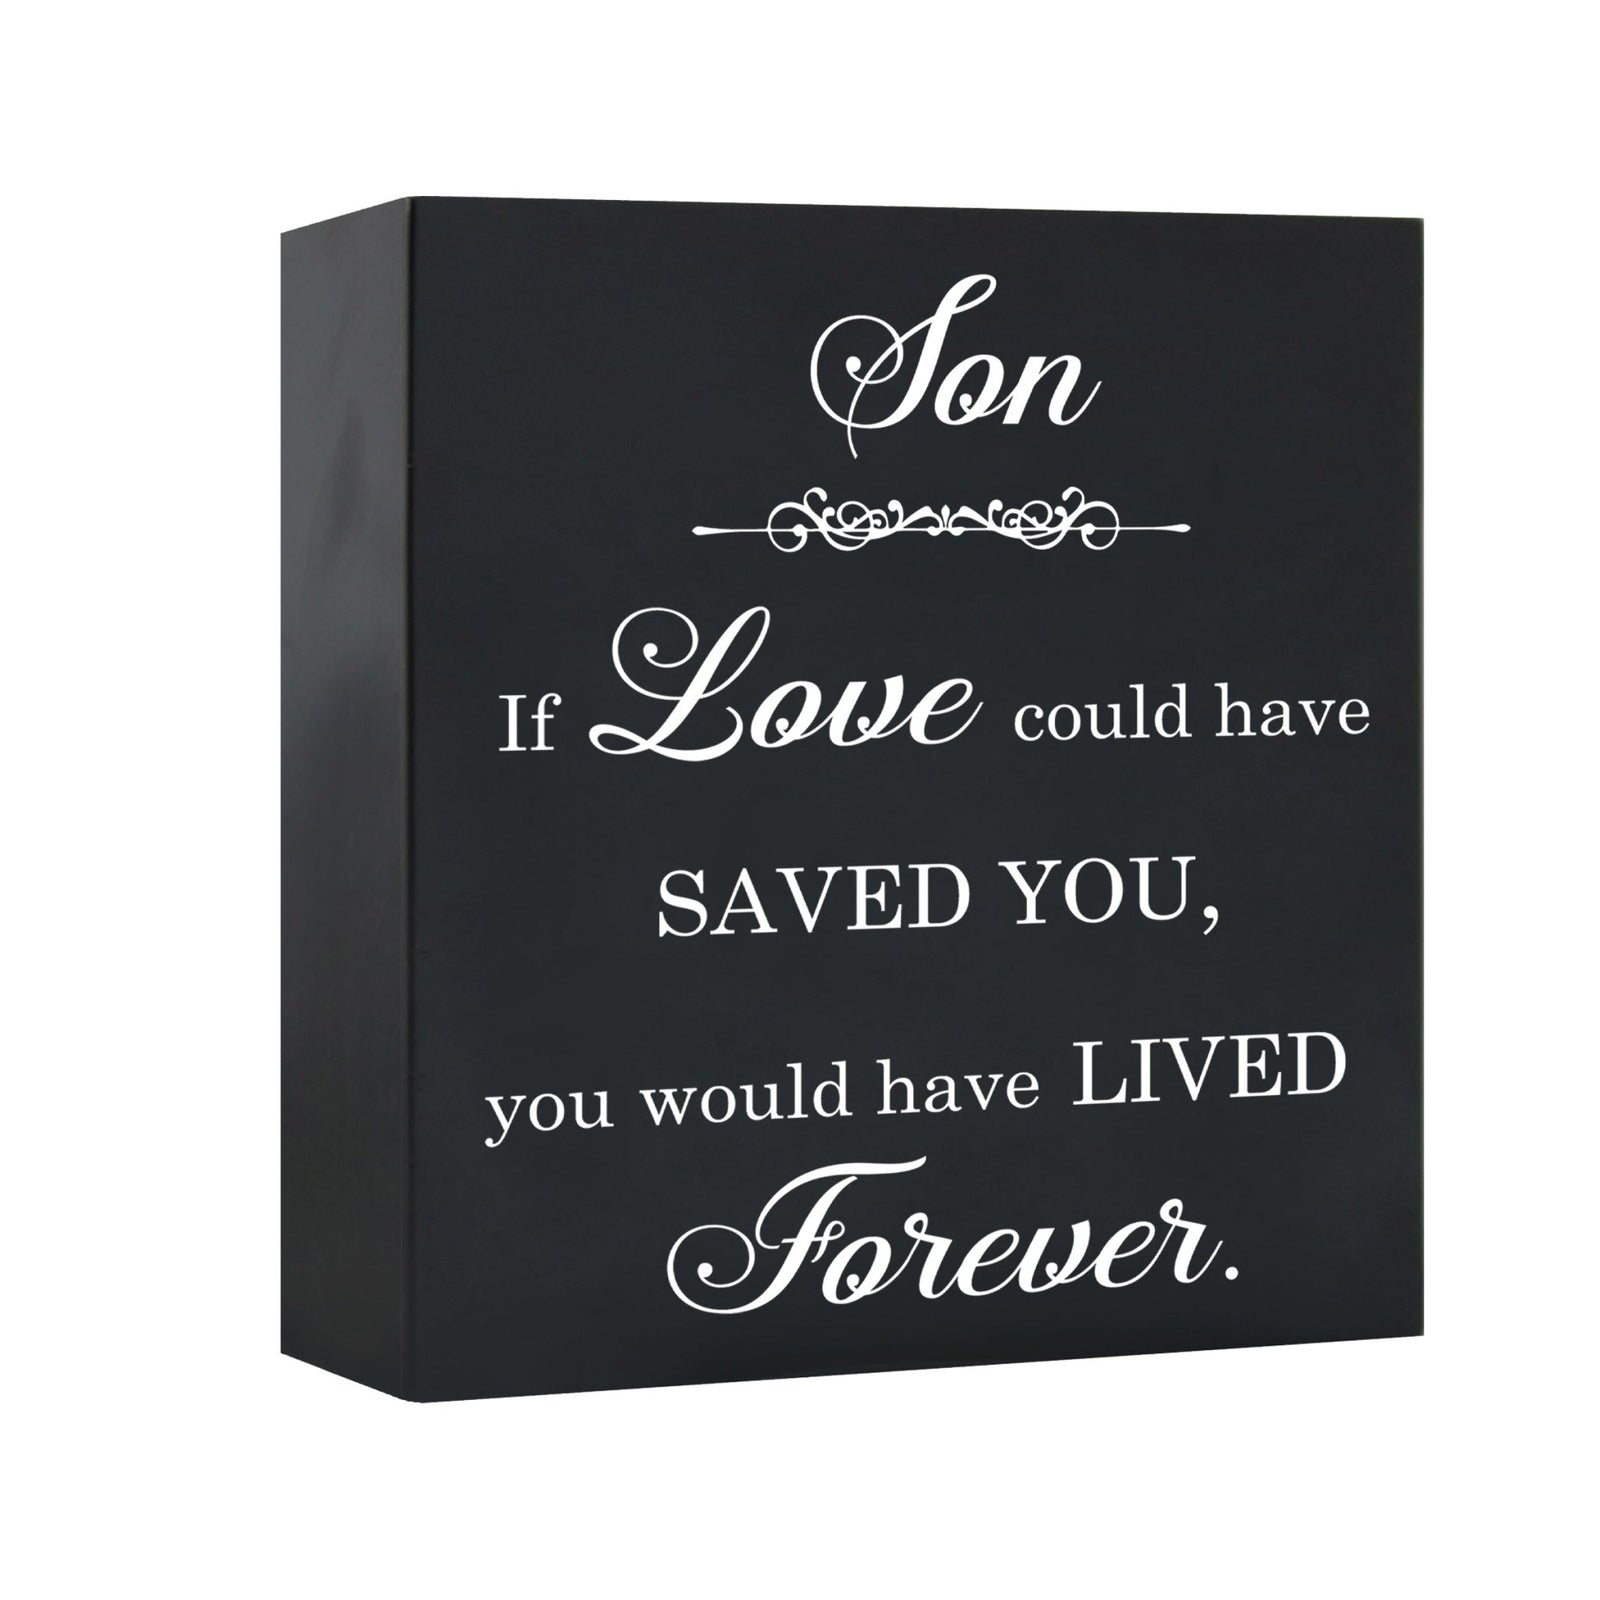 Memorial Keepsake Wooden Cremation Shadow Box and Urn 10x10in Holds 189 Cu Inches Of Human Ashes Son, If Love Could - LifeSong Milestones